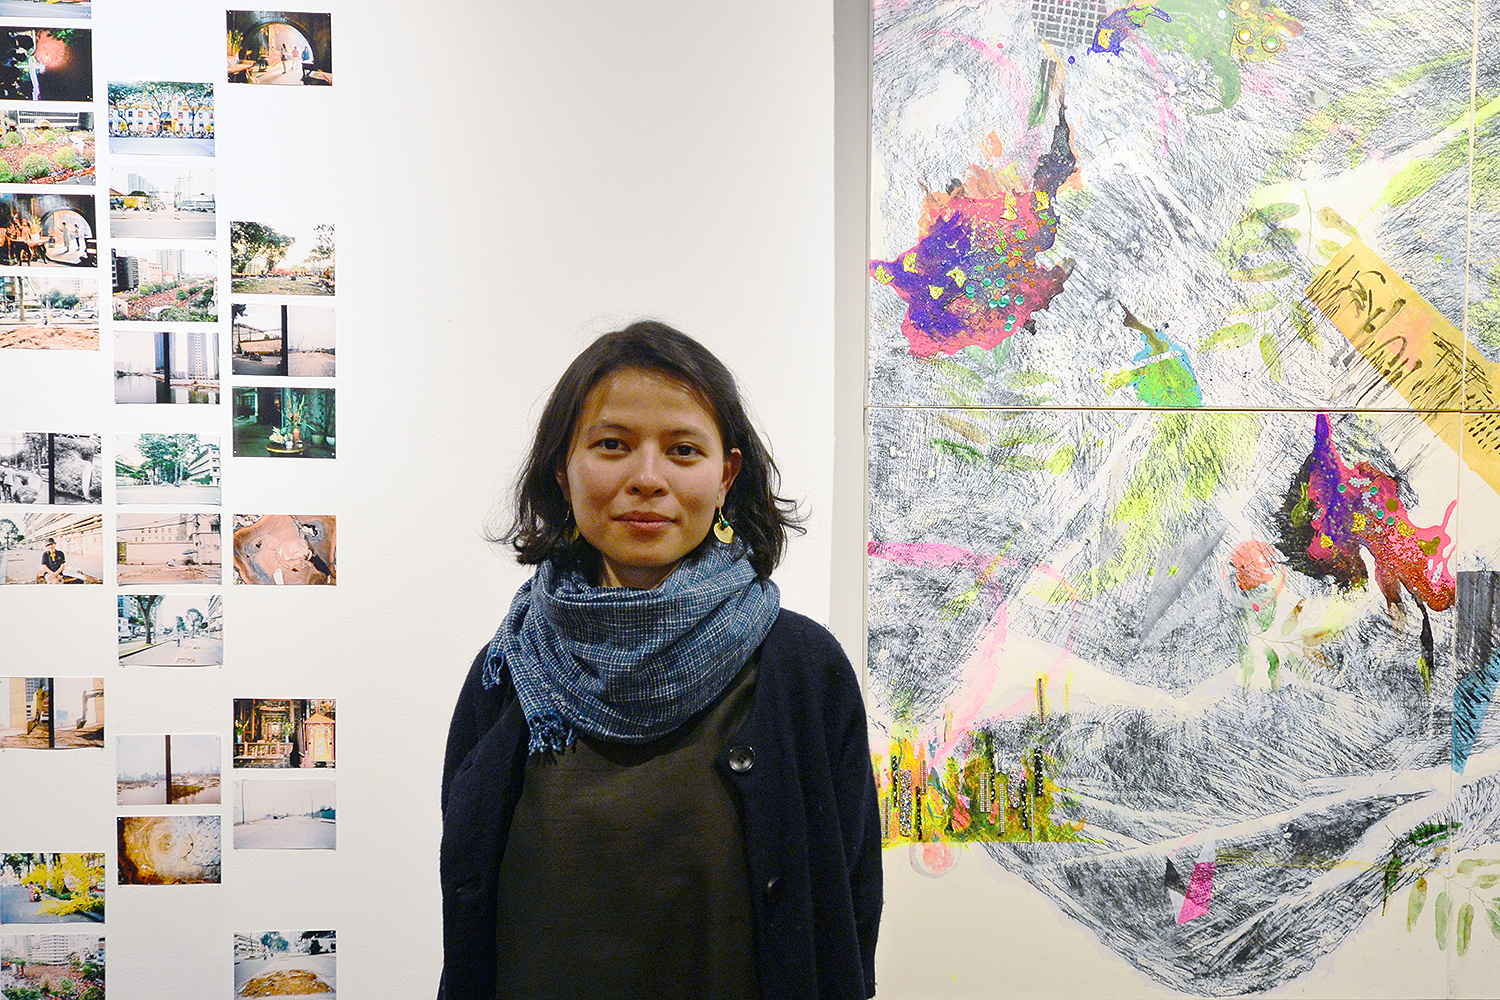 On March 29, Vietnamese artist Lêna Bùi '07 spoke to gallery goers at the opening reception of her exhibit, Proliferation at the College of East Asian Studies. In Proliferation, Bùi draws on her context of living in a rapidly changing country. Her abstract paintings, photographs, and candid video broadly examine the less obvious effects of development on the socio-political and cultural fabrics of the country, and specifically dealing with people's negotiation with nature in various forms.